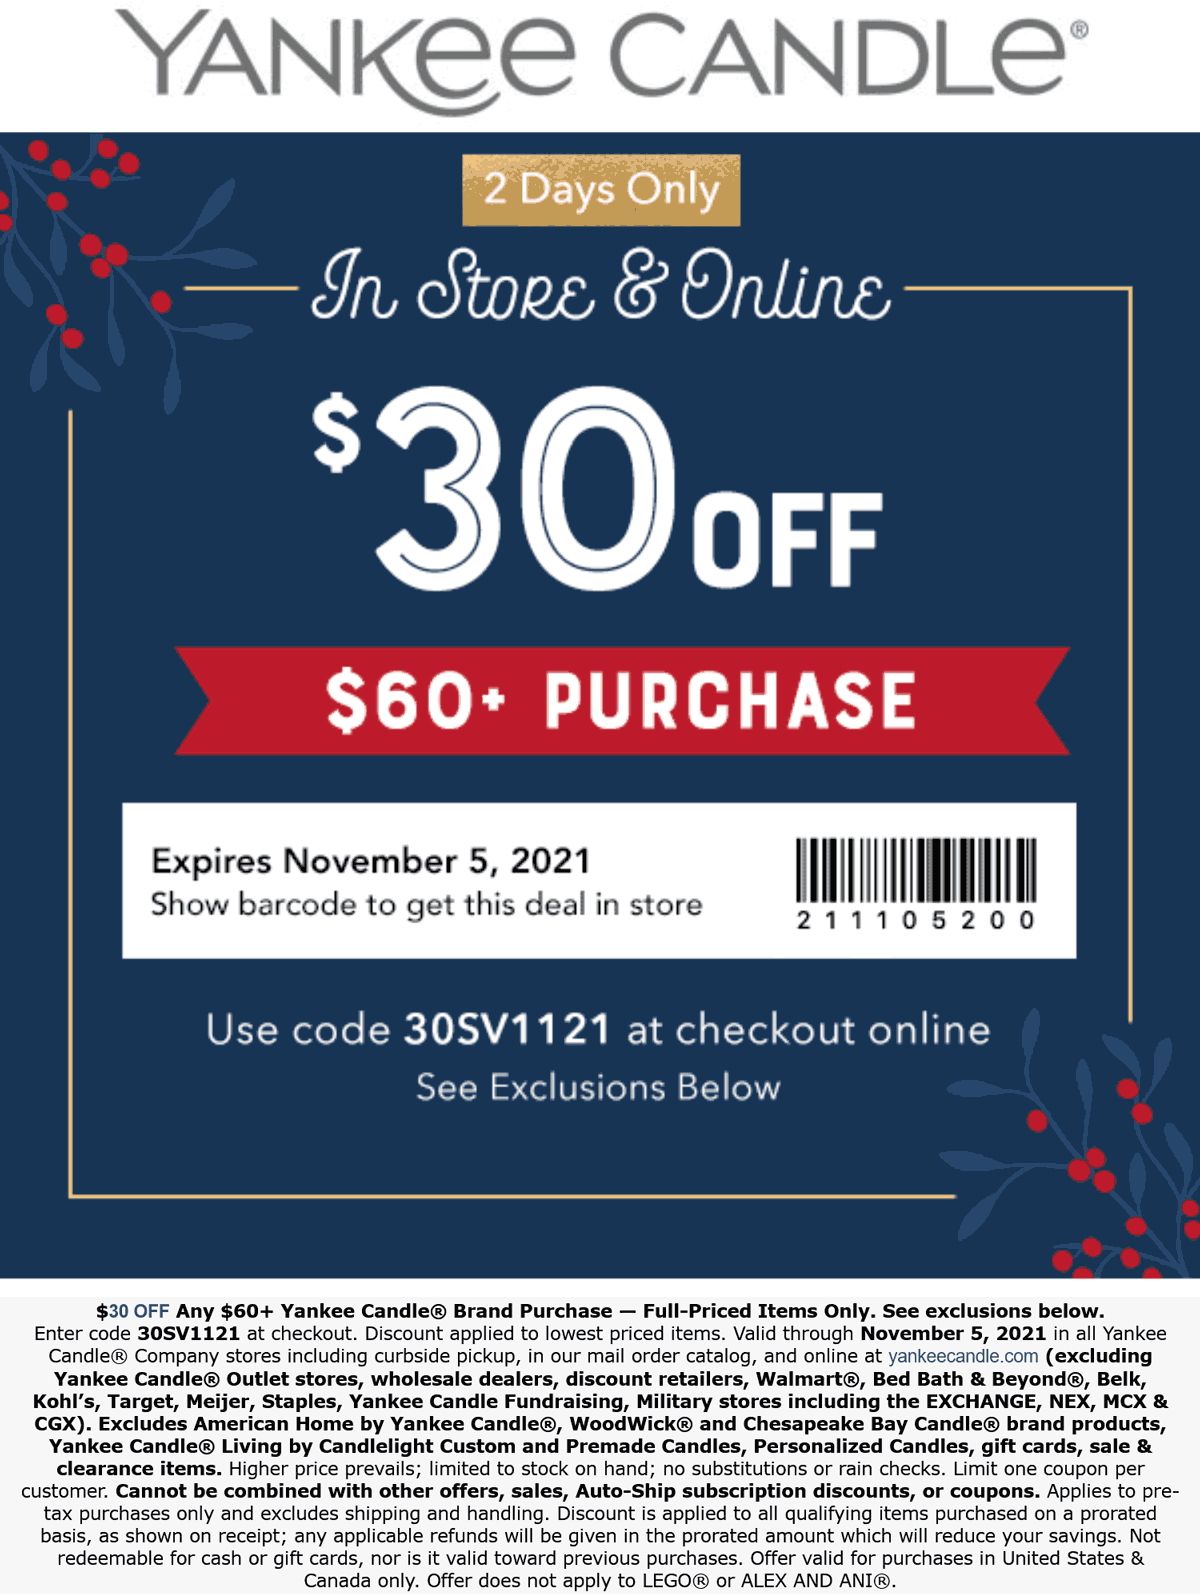 Yankee Candle stores Coupon  $30 off $60 at Yankee Candle, or online via promo code 30SV1121 #yankeecandle 